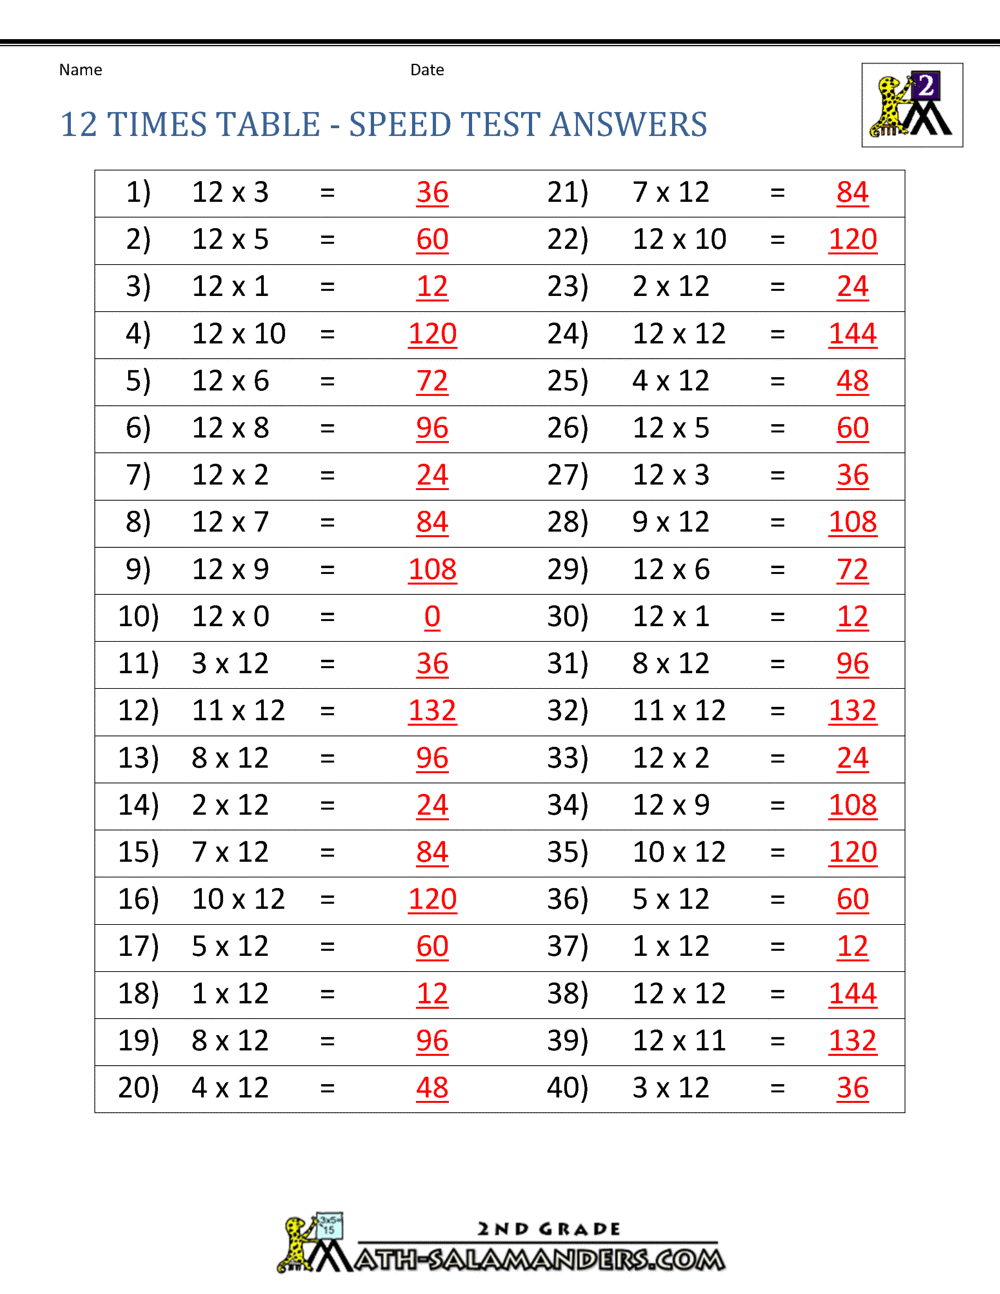 12-times-table